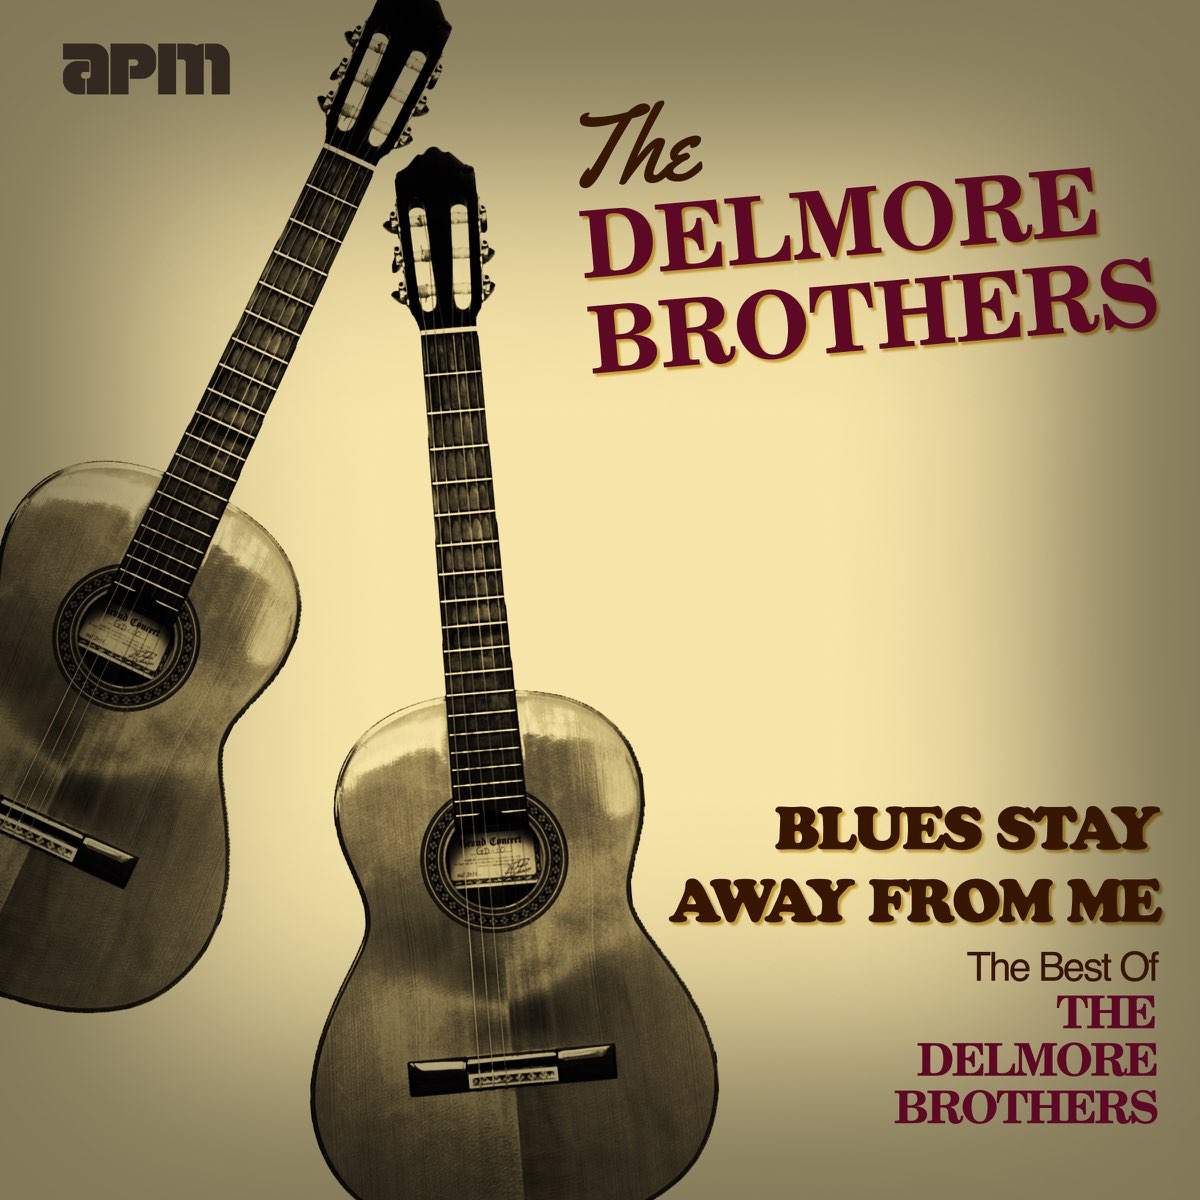 Delmore. Делмора. The Delmore brothers Blues stay away from me Country Music experience.